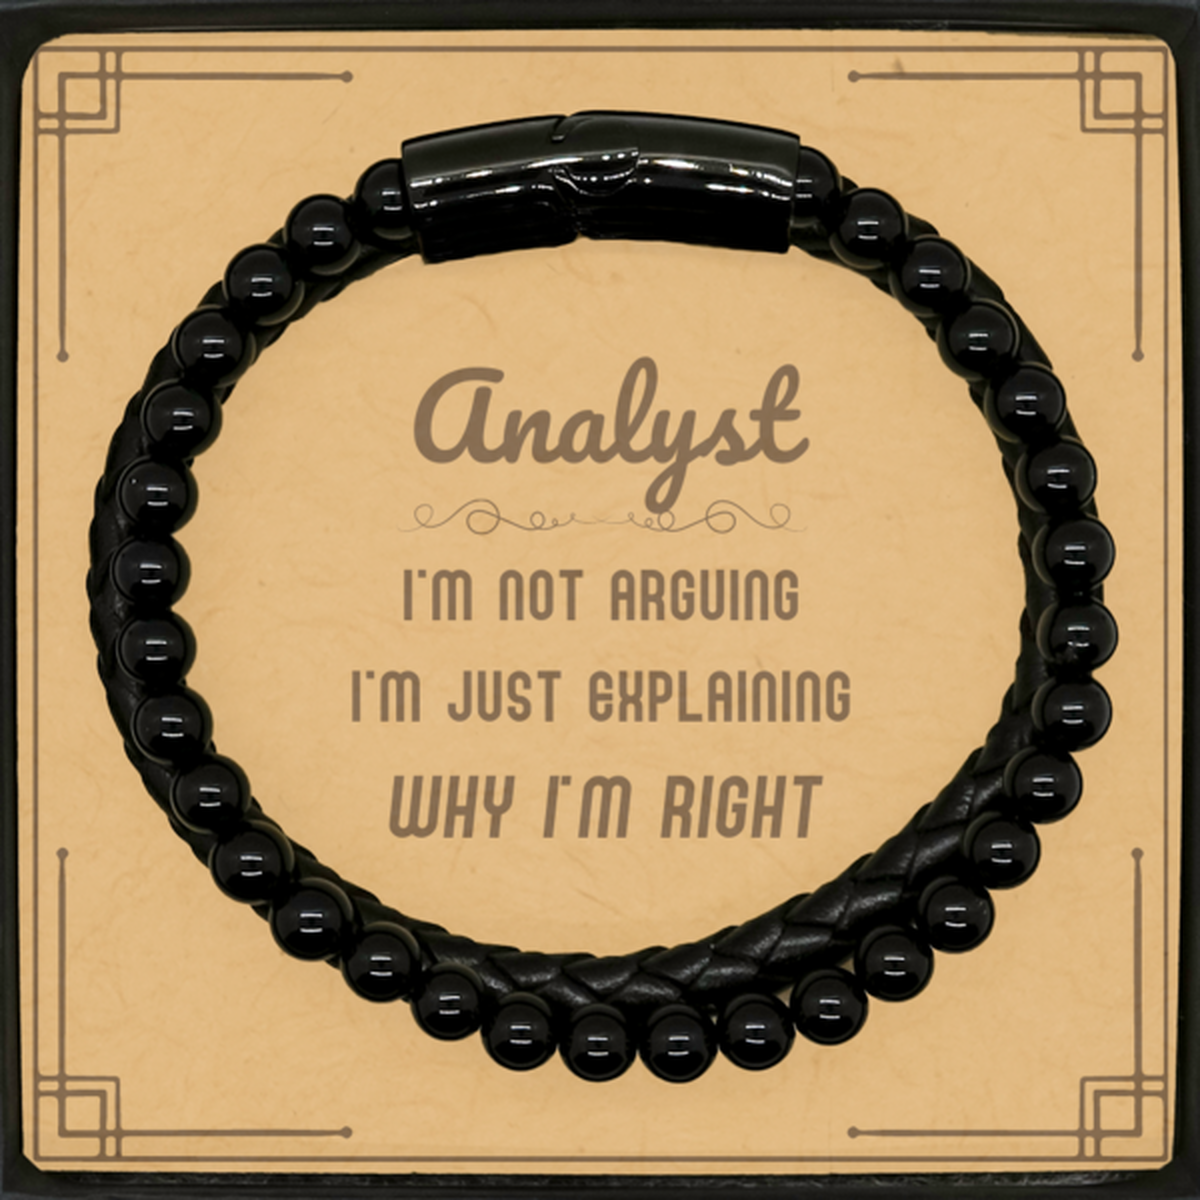 Analyst I'm not Arguing. I'm Just Explaining Why I'm RIGHT Stone Leather Bracelets, Funny Saying Quote Analyst Gifts For Analyst Message Card Graduation Birthday Christmas Gifts for Men Women Coworker